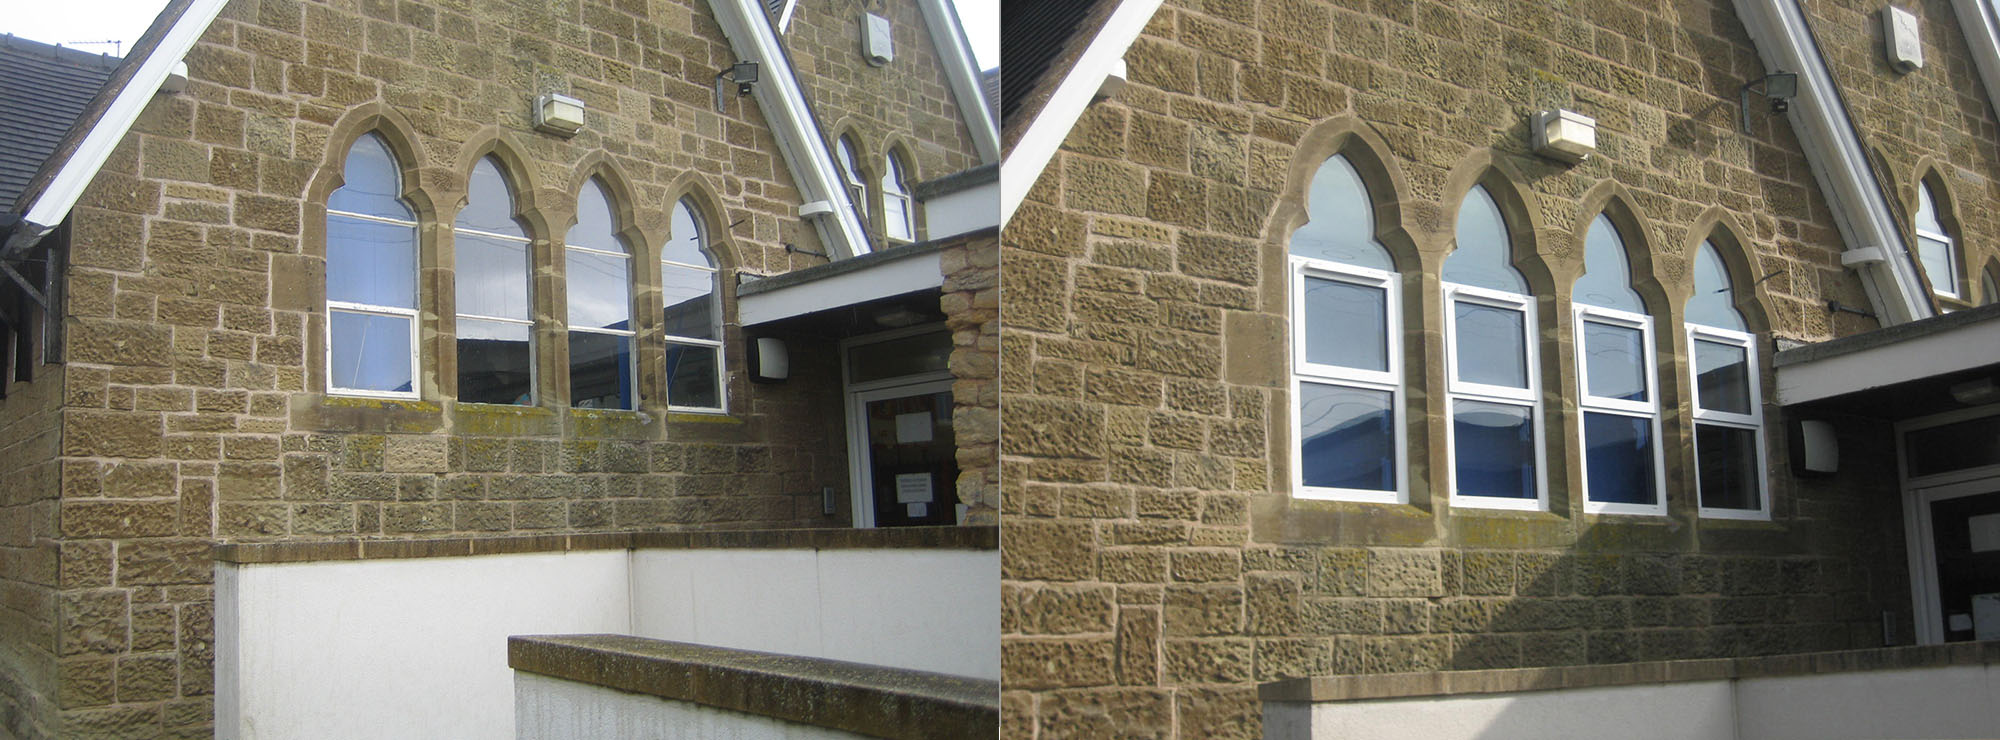 <strong>Primary School in Worcestershire.</strong>Replacement of steel windows in stone surrounds with white commercial aluminium inserts.